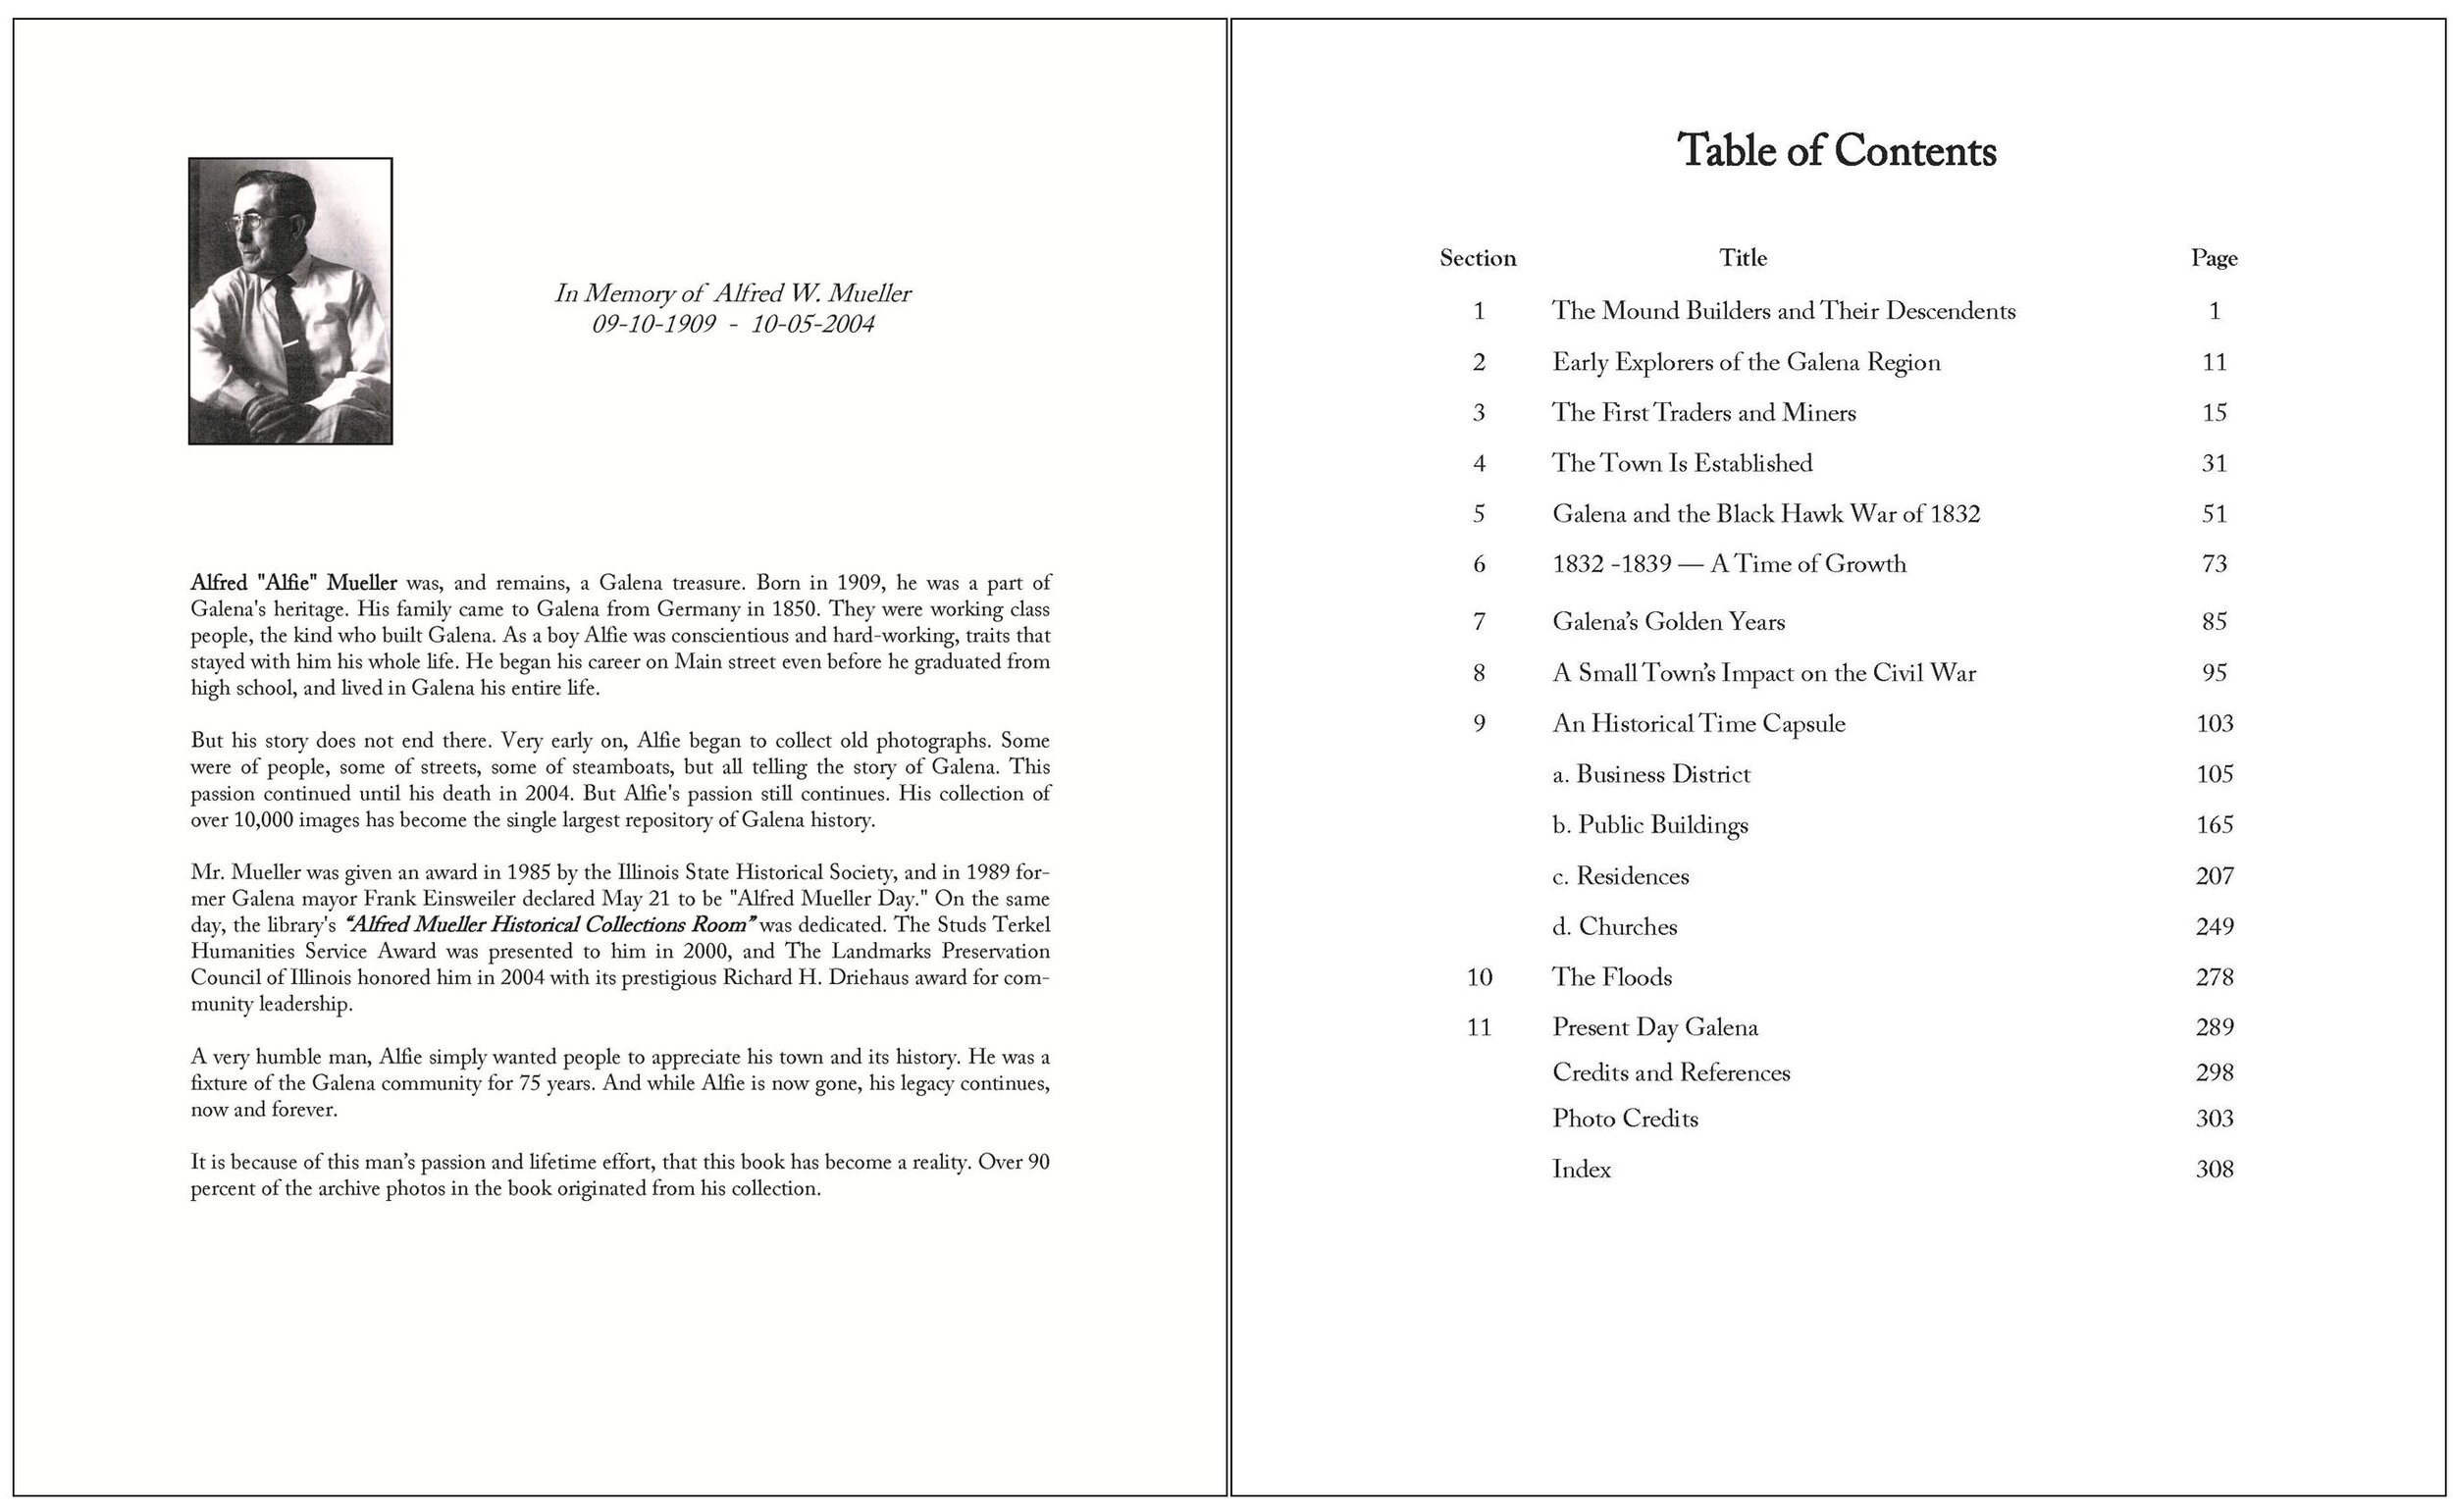 Dedication Page & Table of Contents.jpg